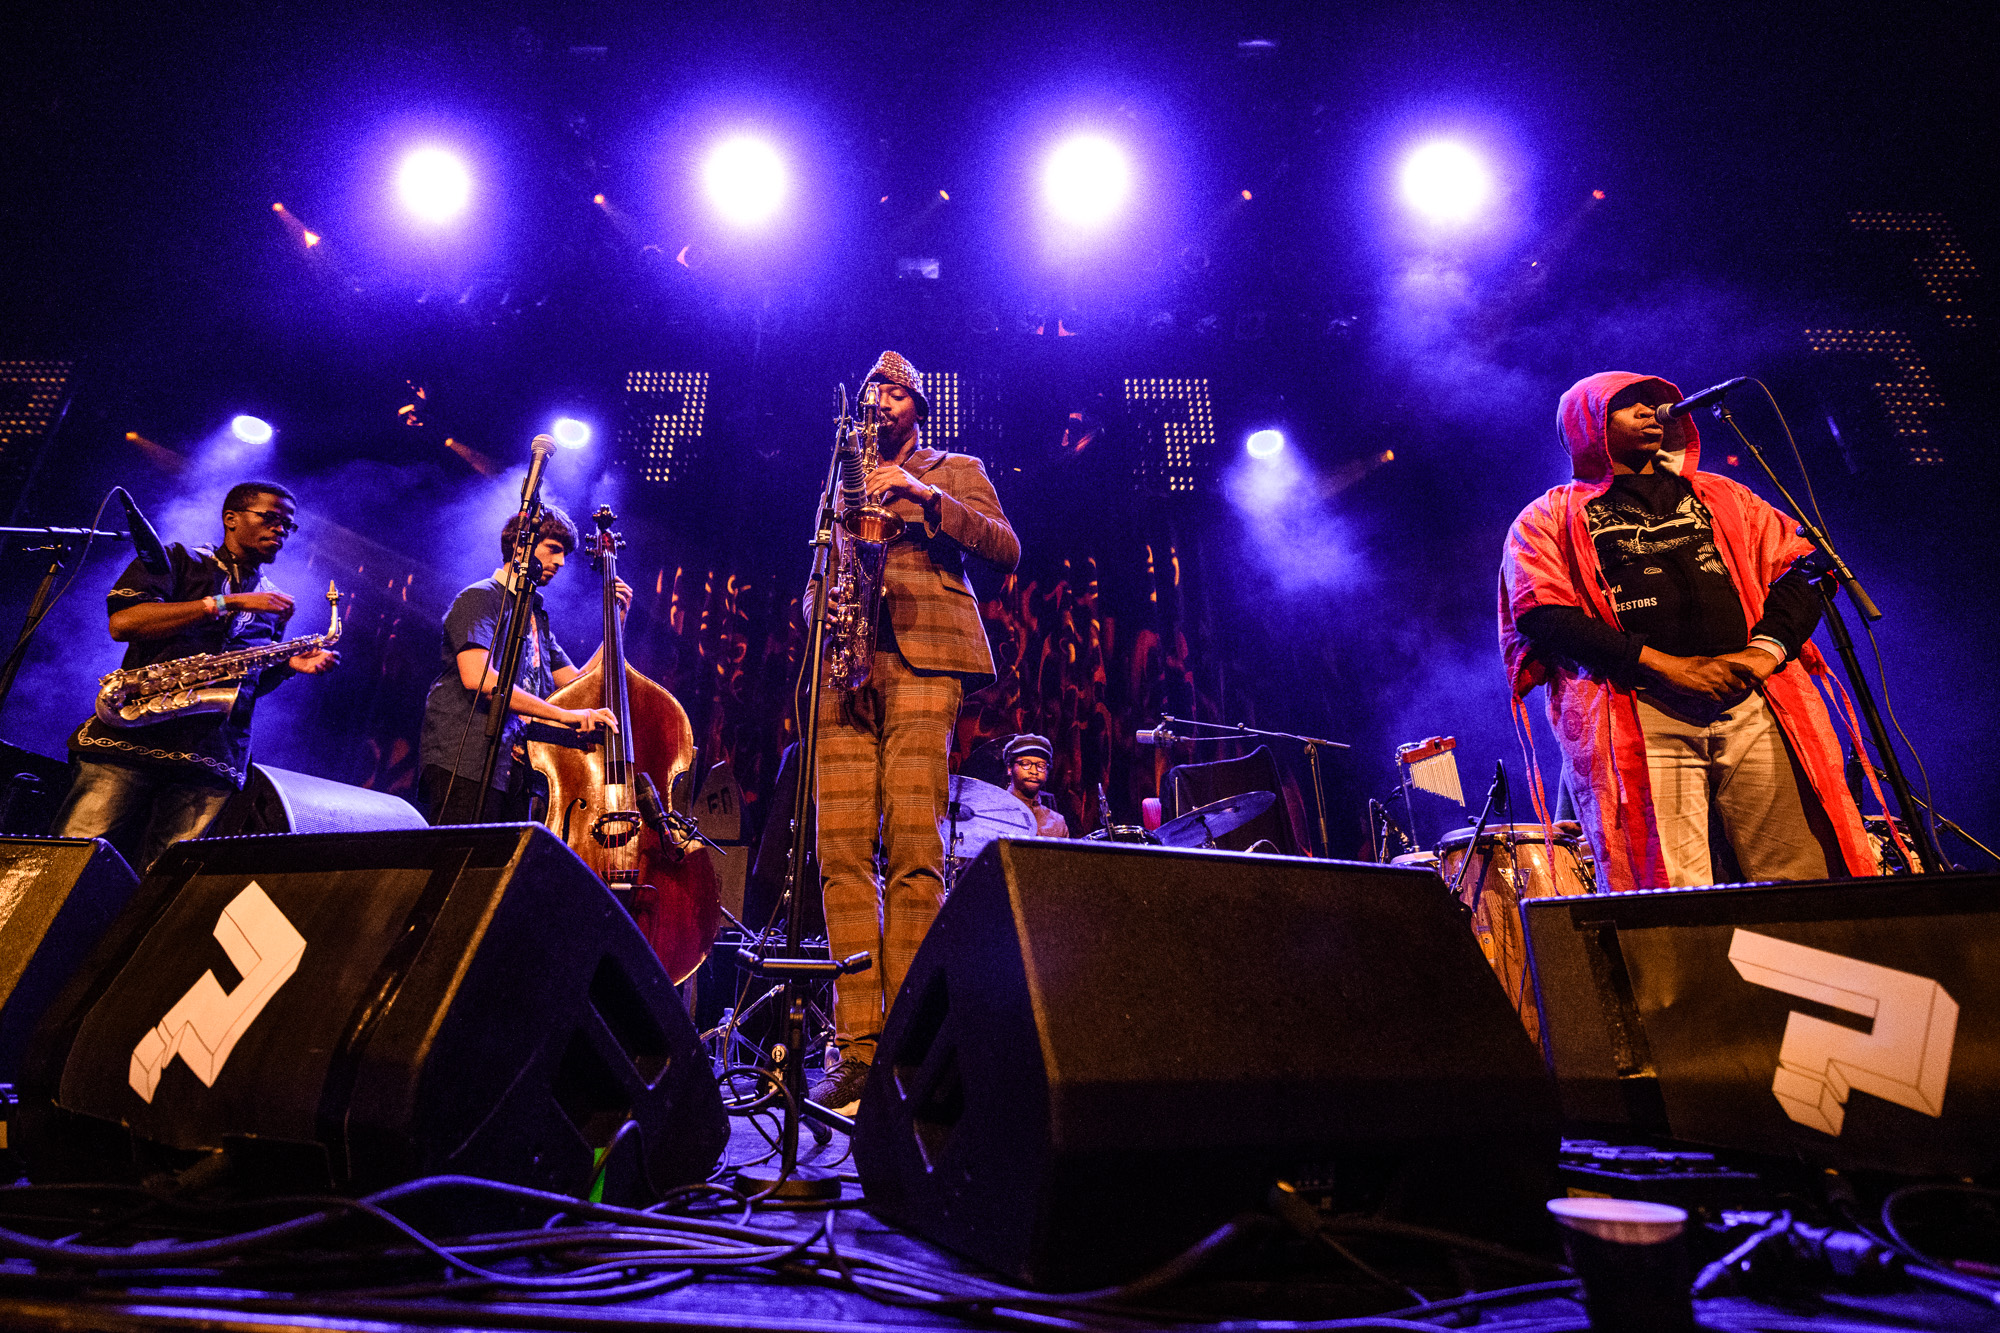 Listen to Shabaka & The Ancestors’ powerful performance at LGW17, curated by James Holden